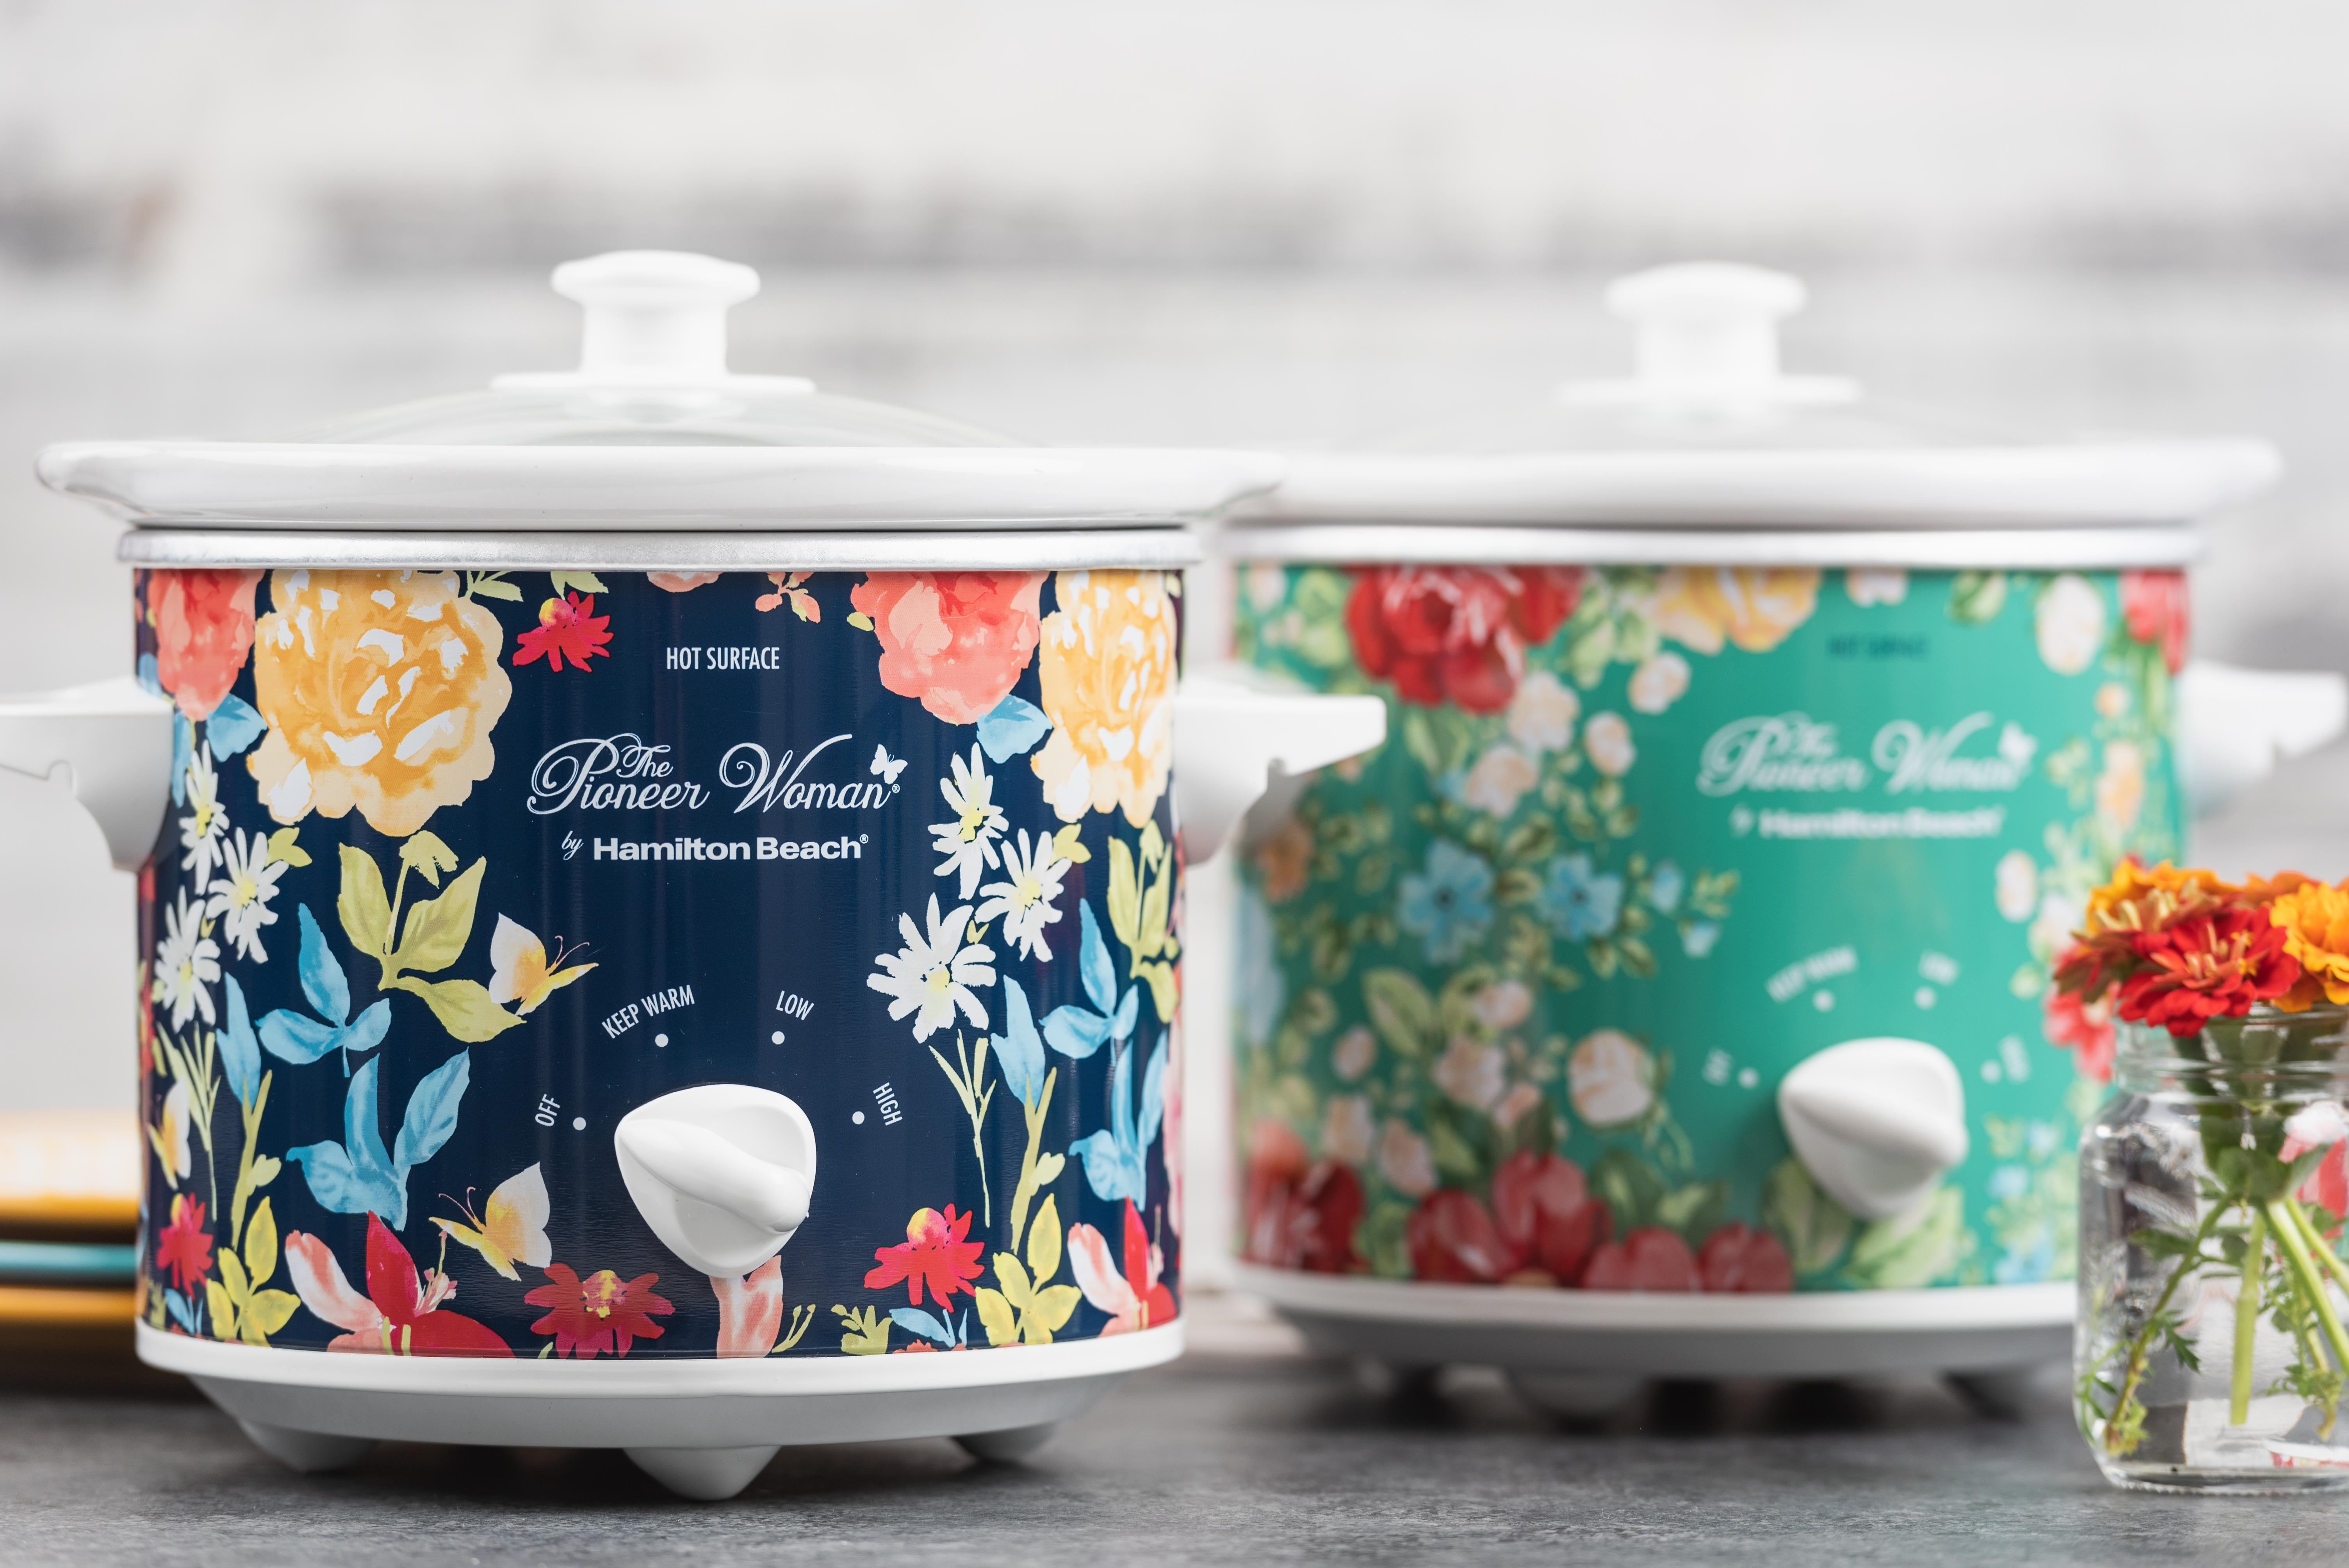 The Pioneer Woman Slow Cooker 1.5 Quart Twin Pack, Fiona Floral and Vintage Floral, 33016 - image 3 of 6